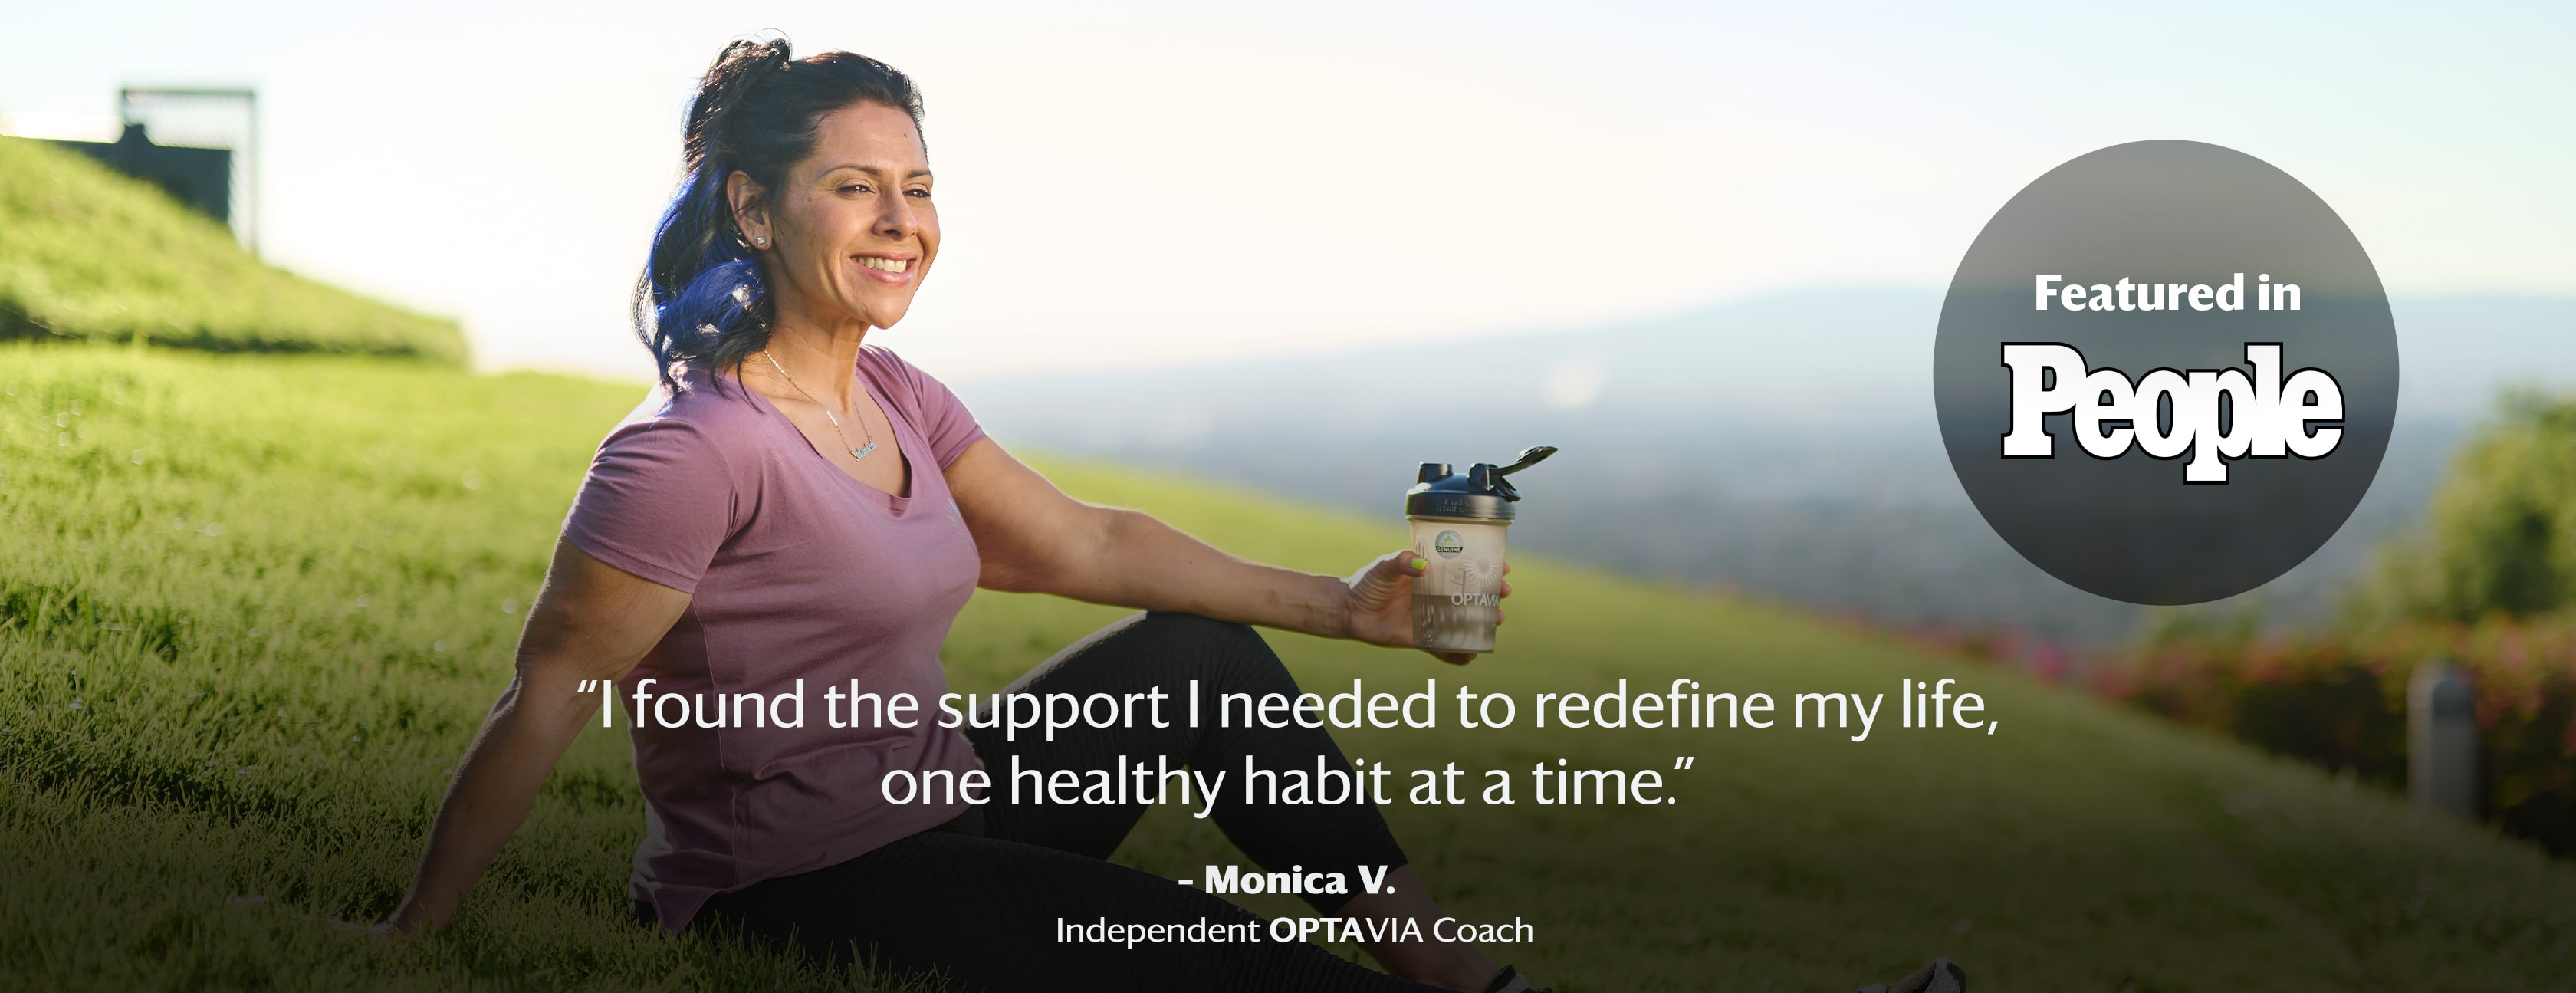 I found the supoort I needed to redefine my life, one healty habit at a time. Monica L., Independent Optavia Coach.